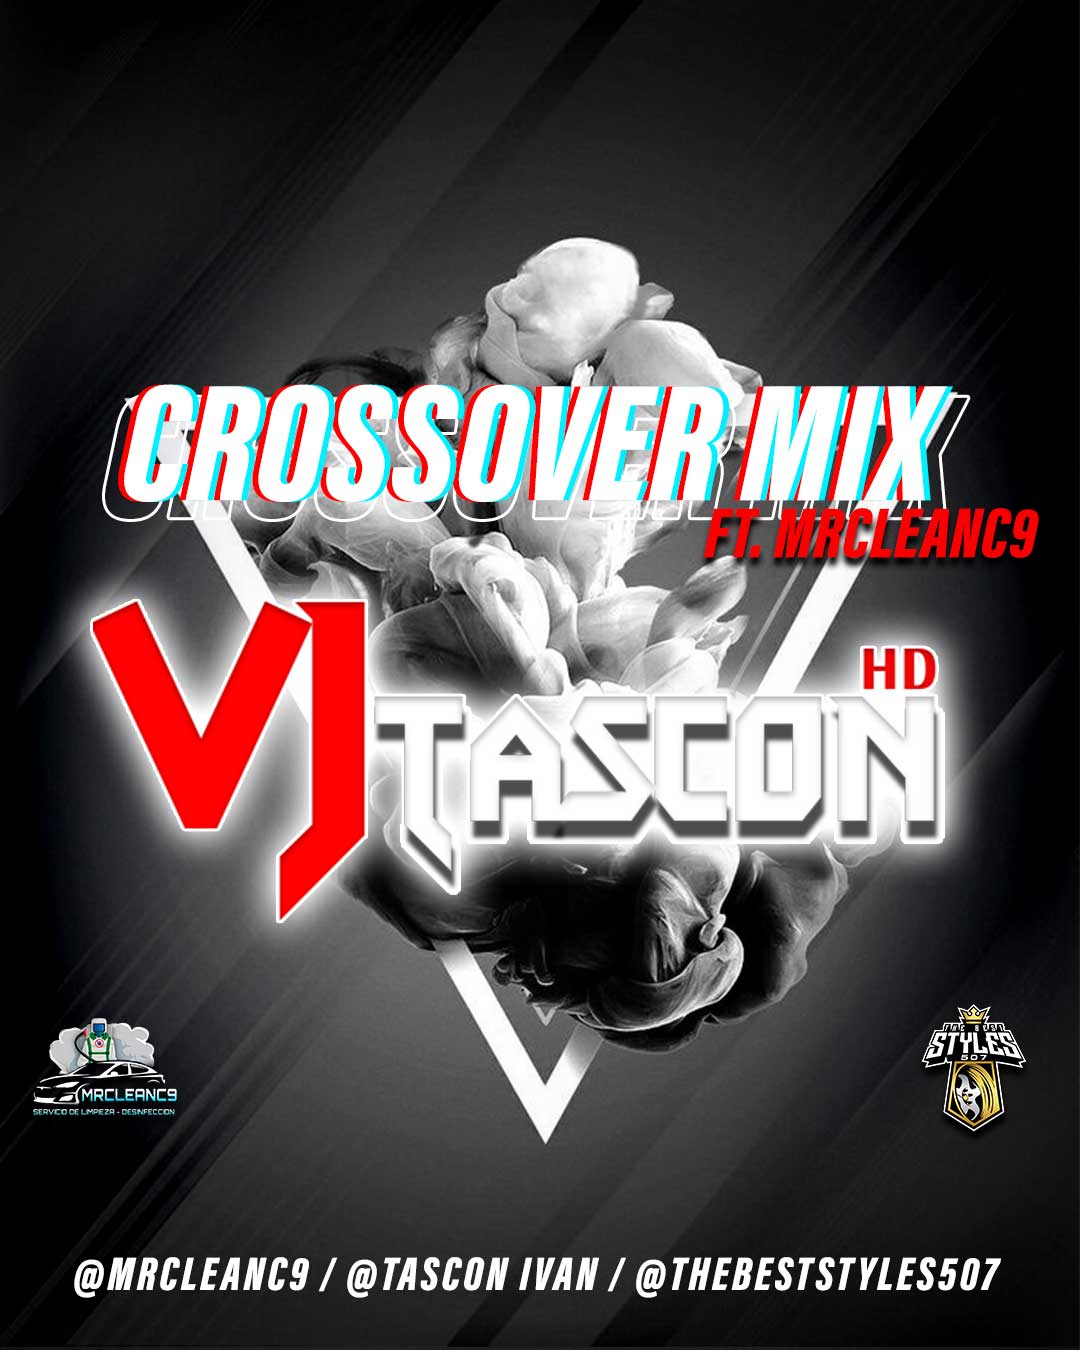 Crossover Mix Ft MrCleanc9 - VjTasconHD.mp3